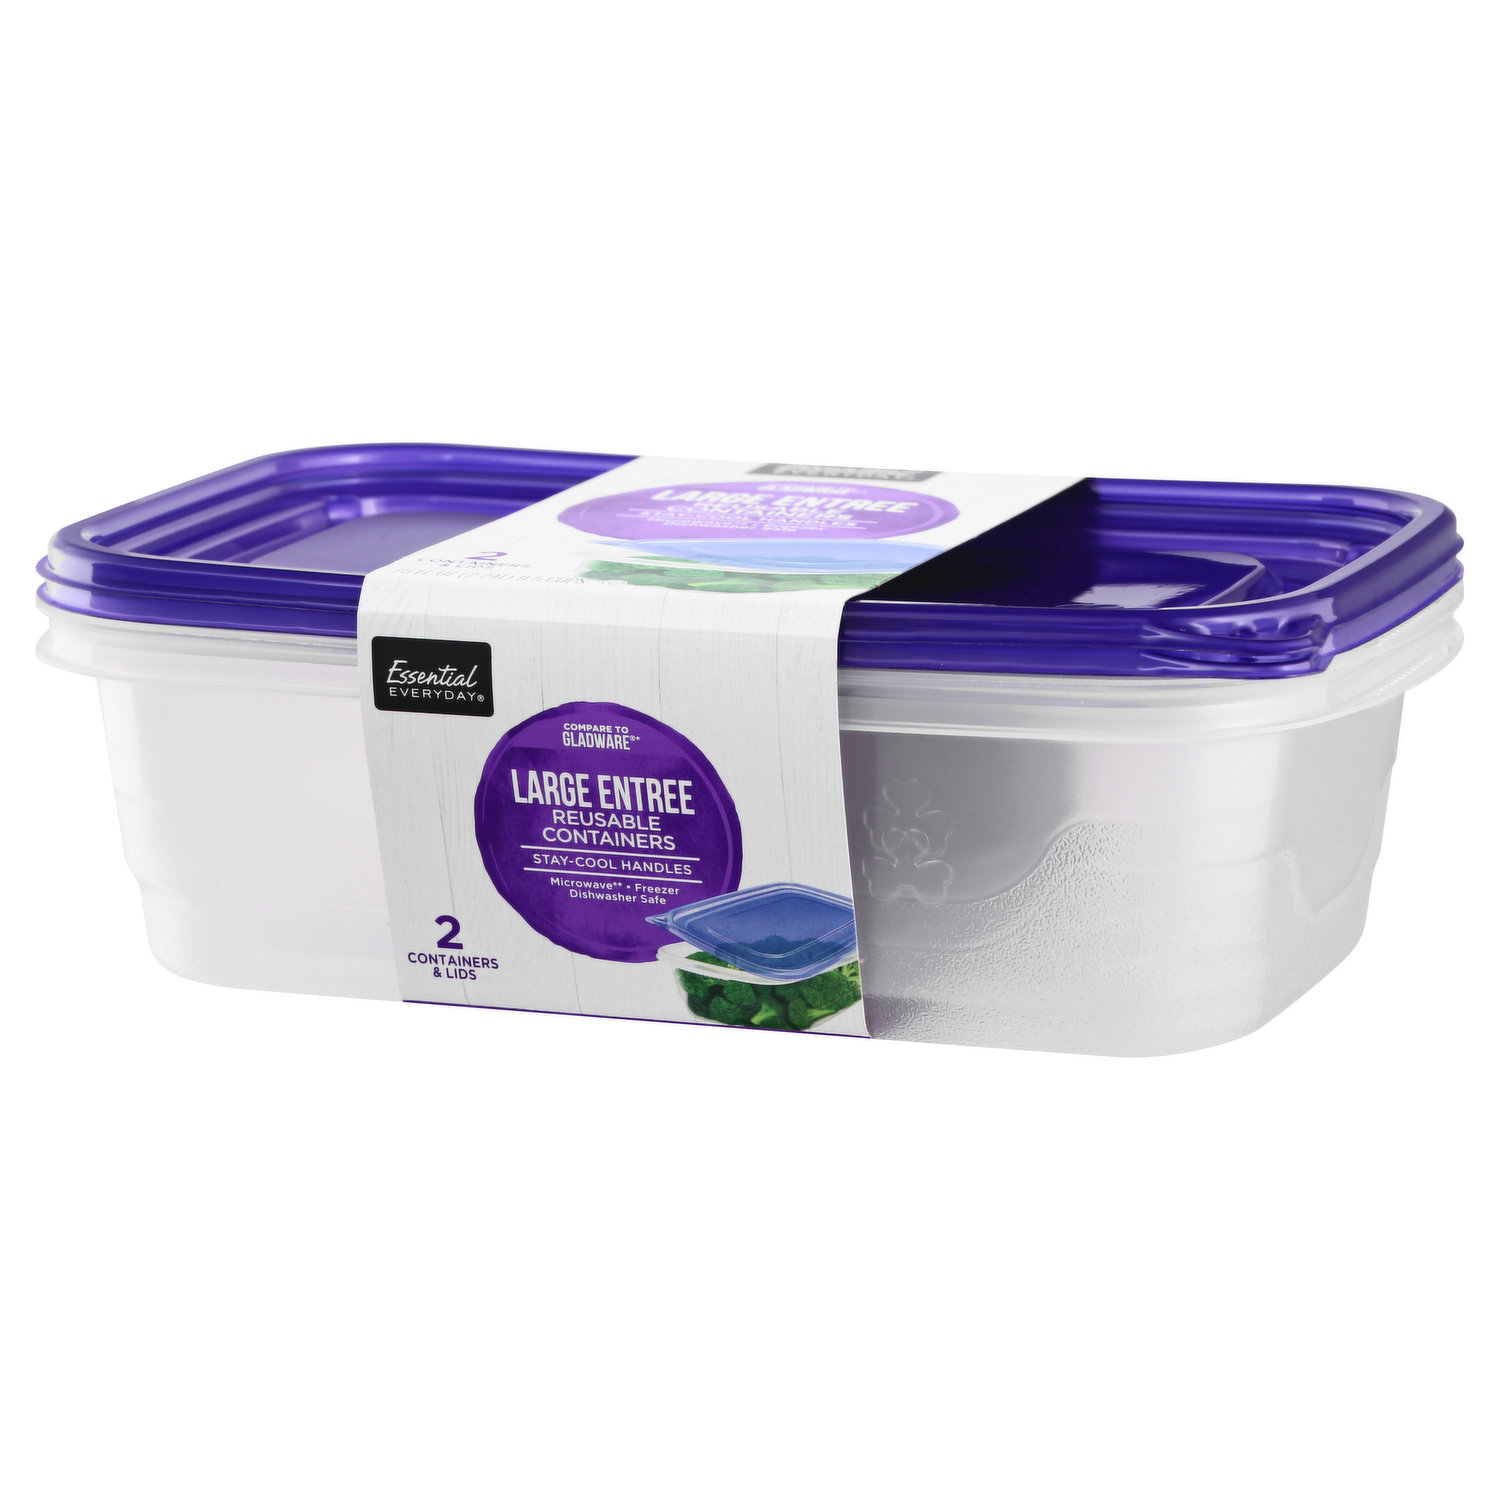 Essential Everyday Reusable Containers, Deep Dish, 64 Fluid Ounce